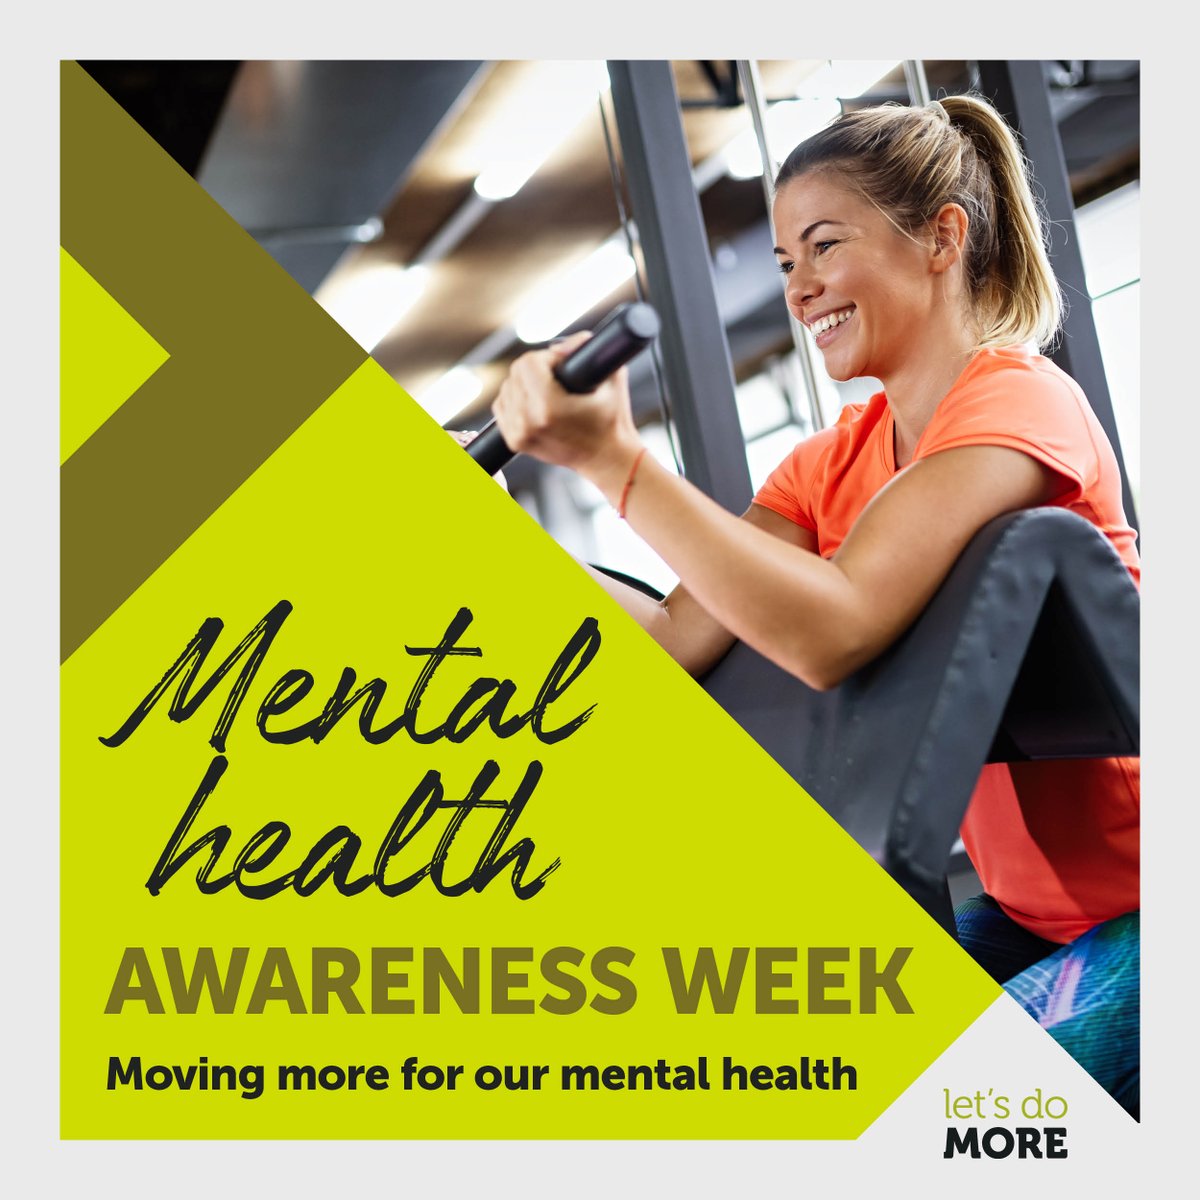 It's Mental Health Awareness Week, so we will be shouting about the amazing benefits of exercise on our wellbeing 💜 To start, tell us in the comments what type of exercise helps you to feel fantastic 💬 #MentalHealthAwarenessWeek #MHAW24 #MomentsForMovement #MentalHealth